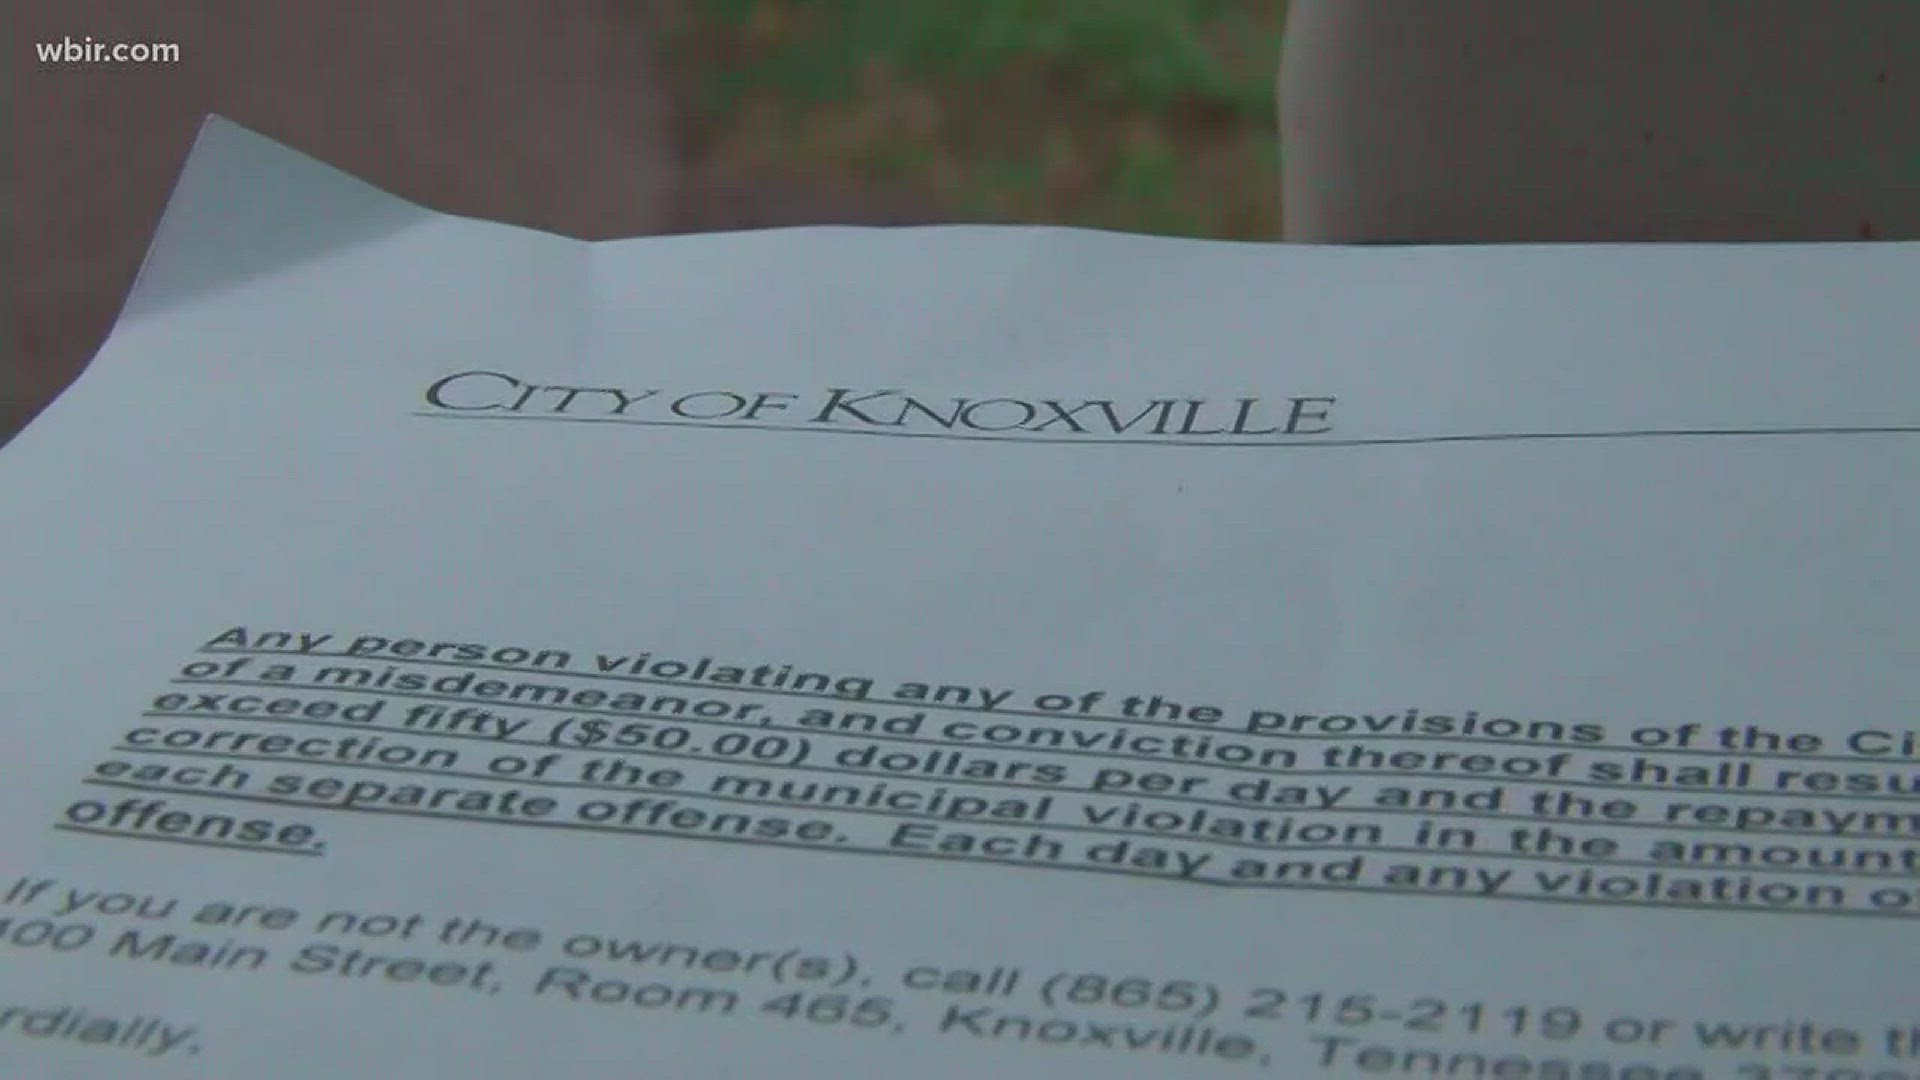 While Knoxville Airbnb owners who do not live on their rental property are adjusting to a new law, city leaders are choosing to postpone any action on expanding the Parkridge Historical District.